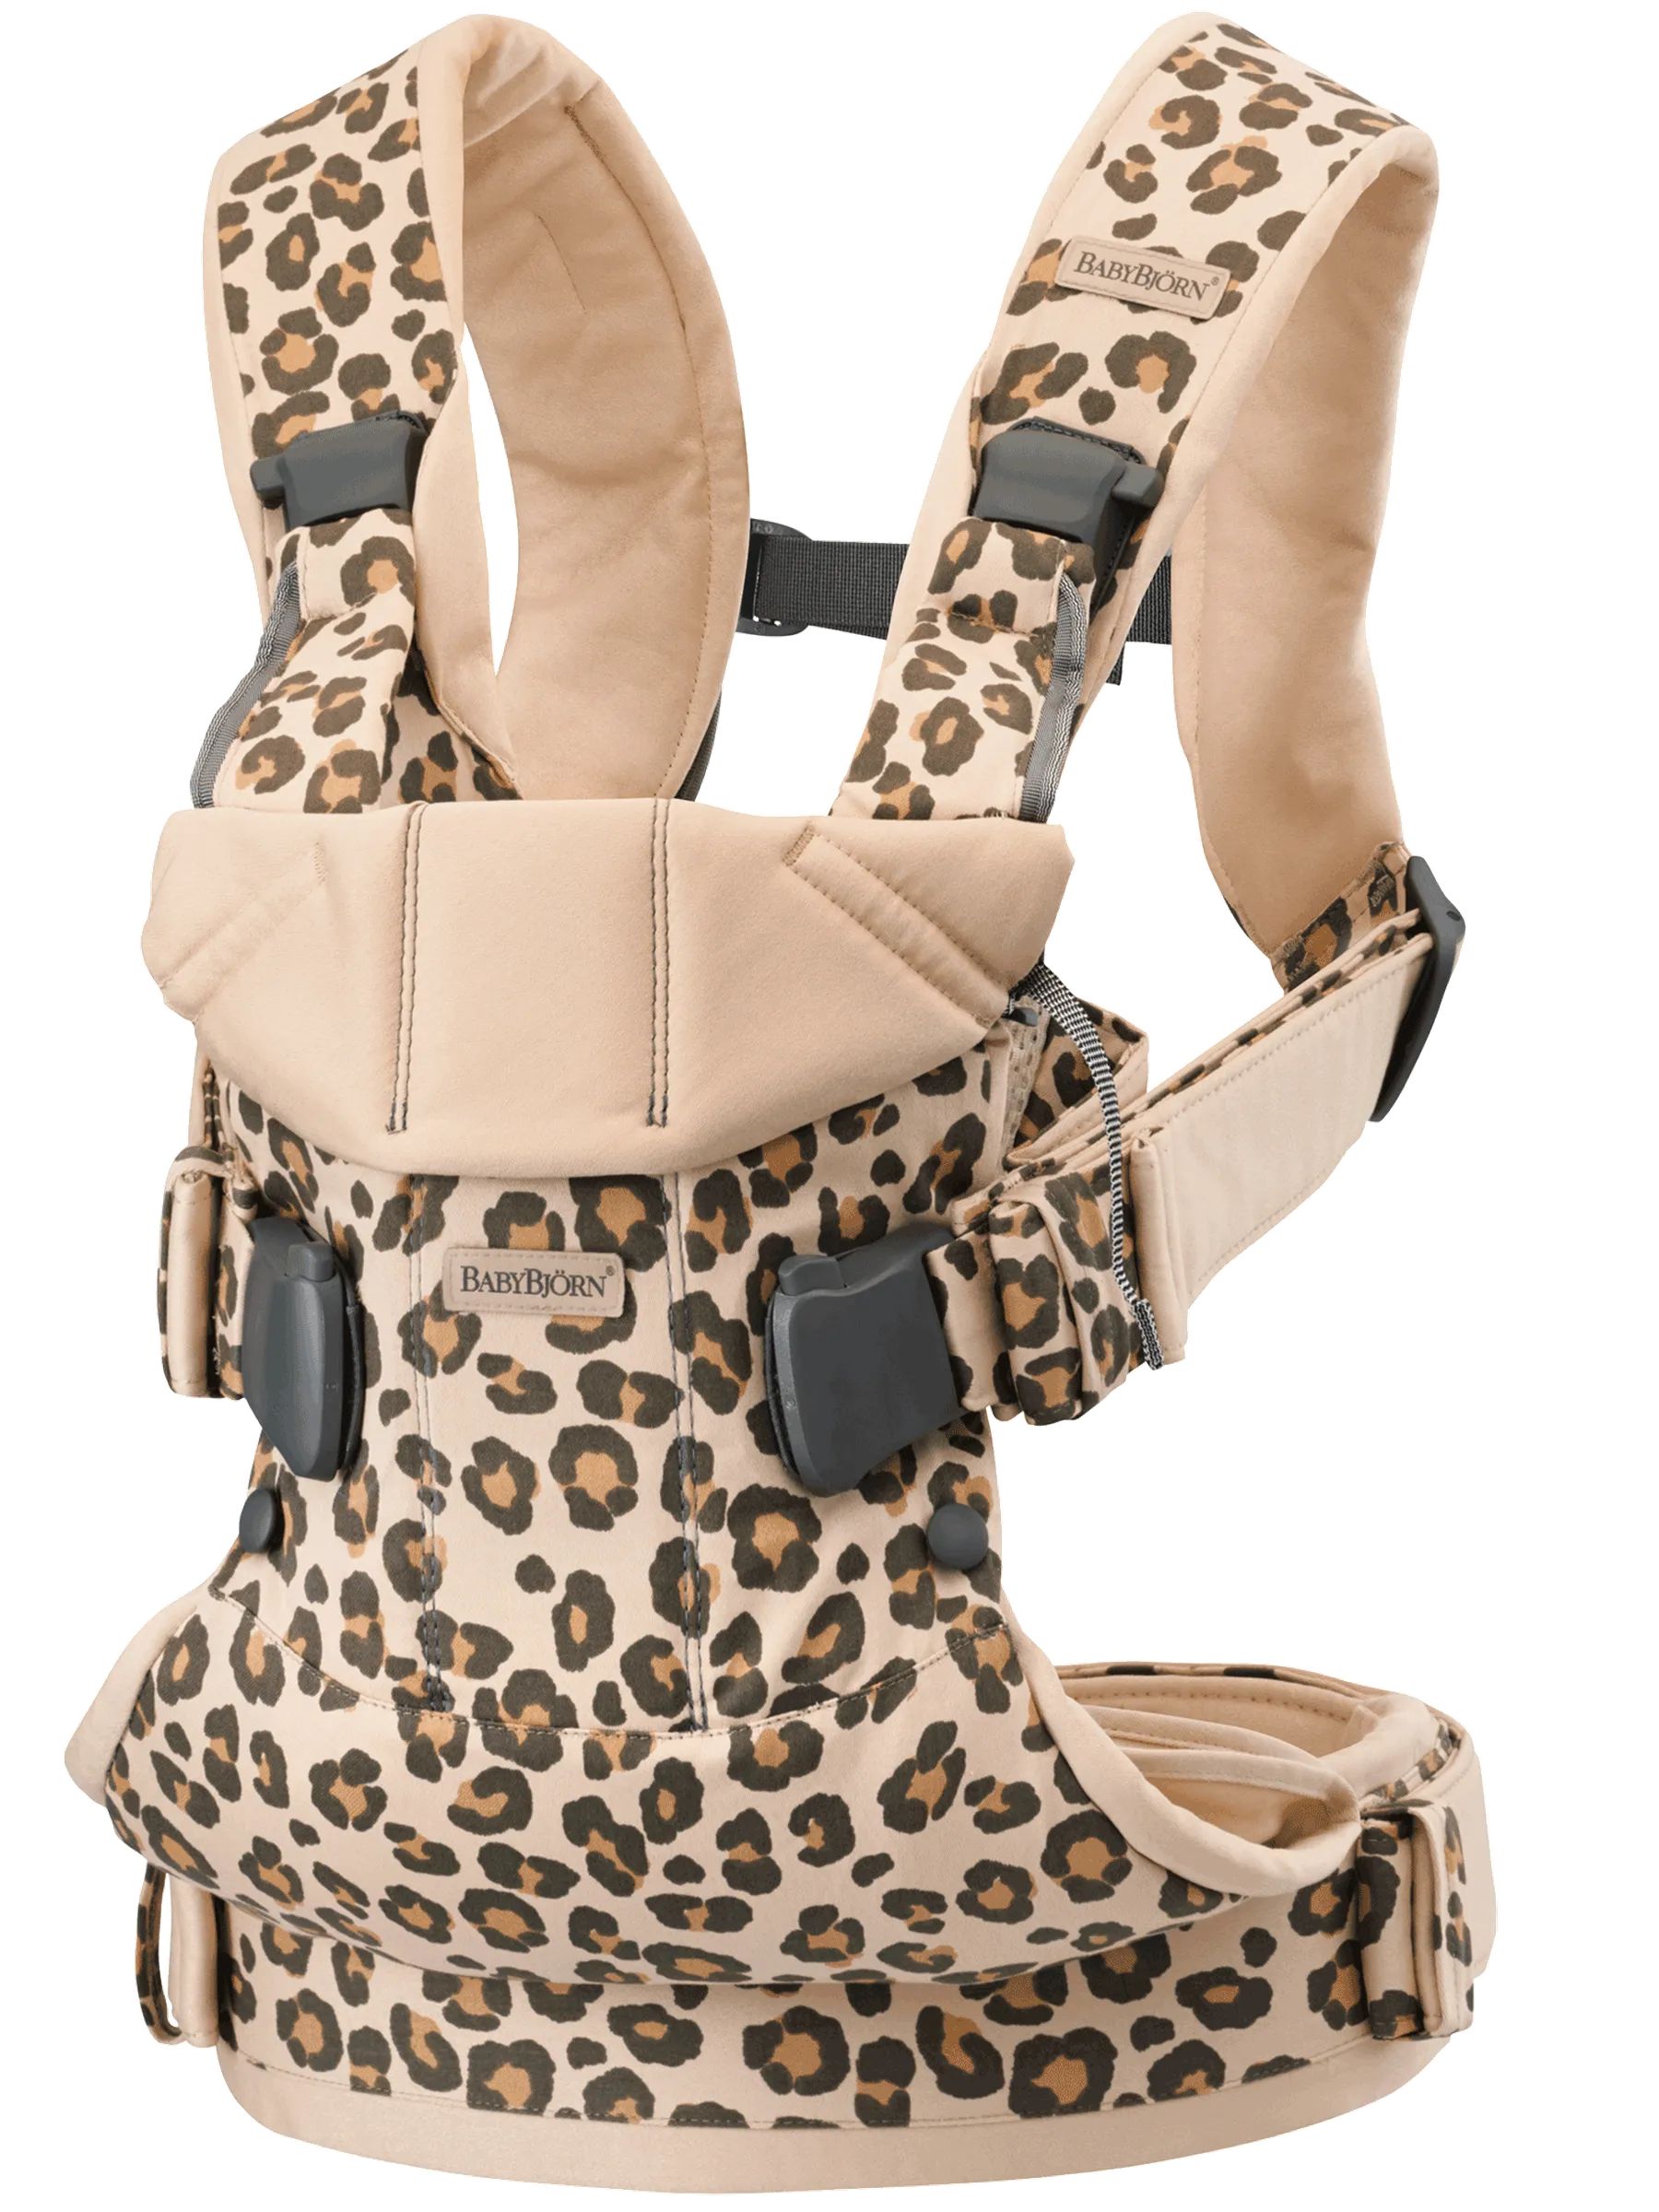 Baby Carrier One | BabyBjorn